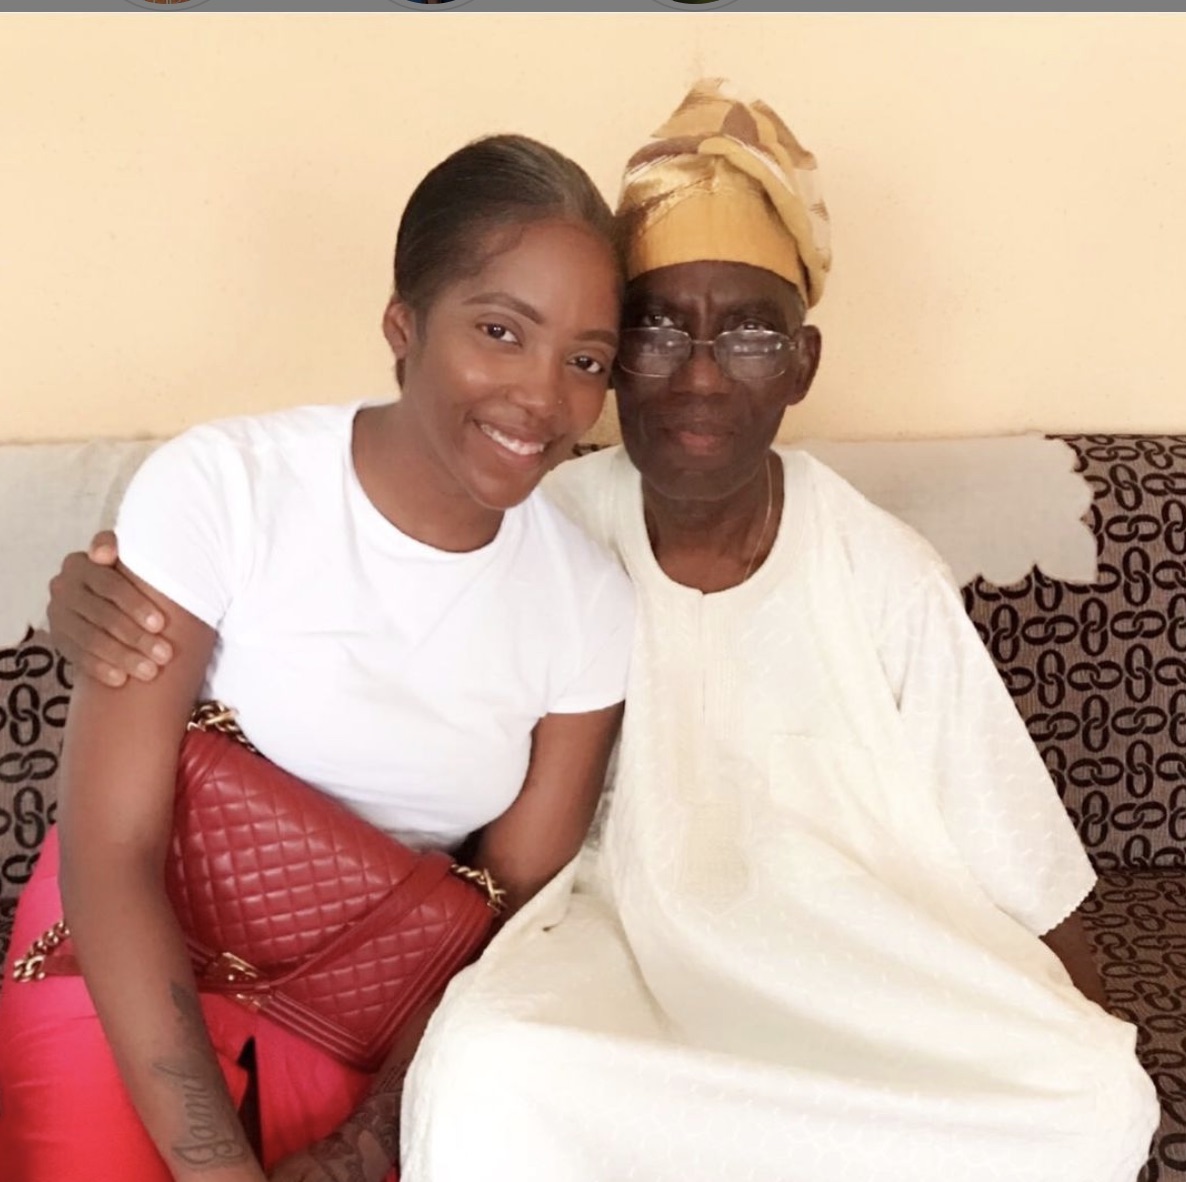 Tiwa Savage with her dad as posted on Instagram